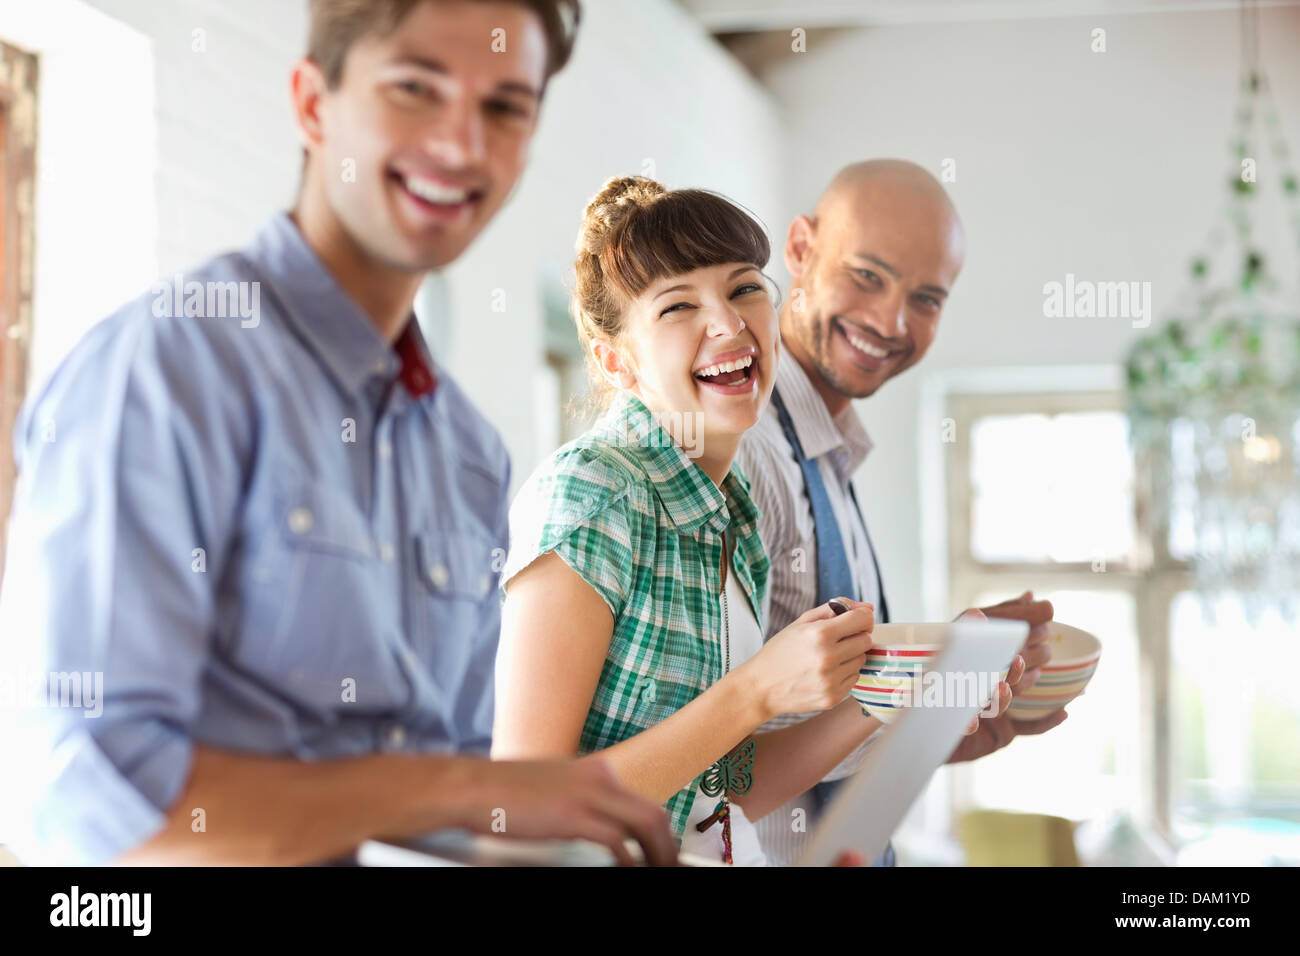 Friends having breakfast together in kitchen Stock Photo